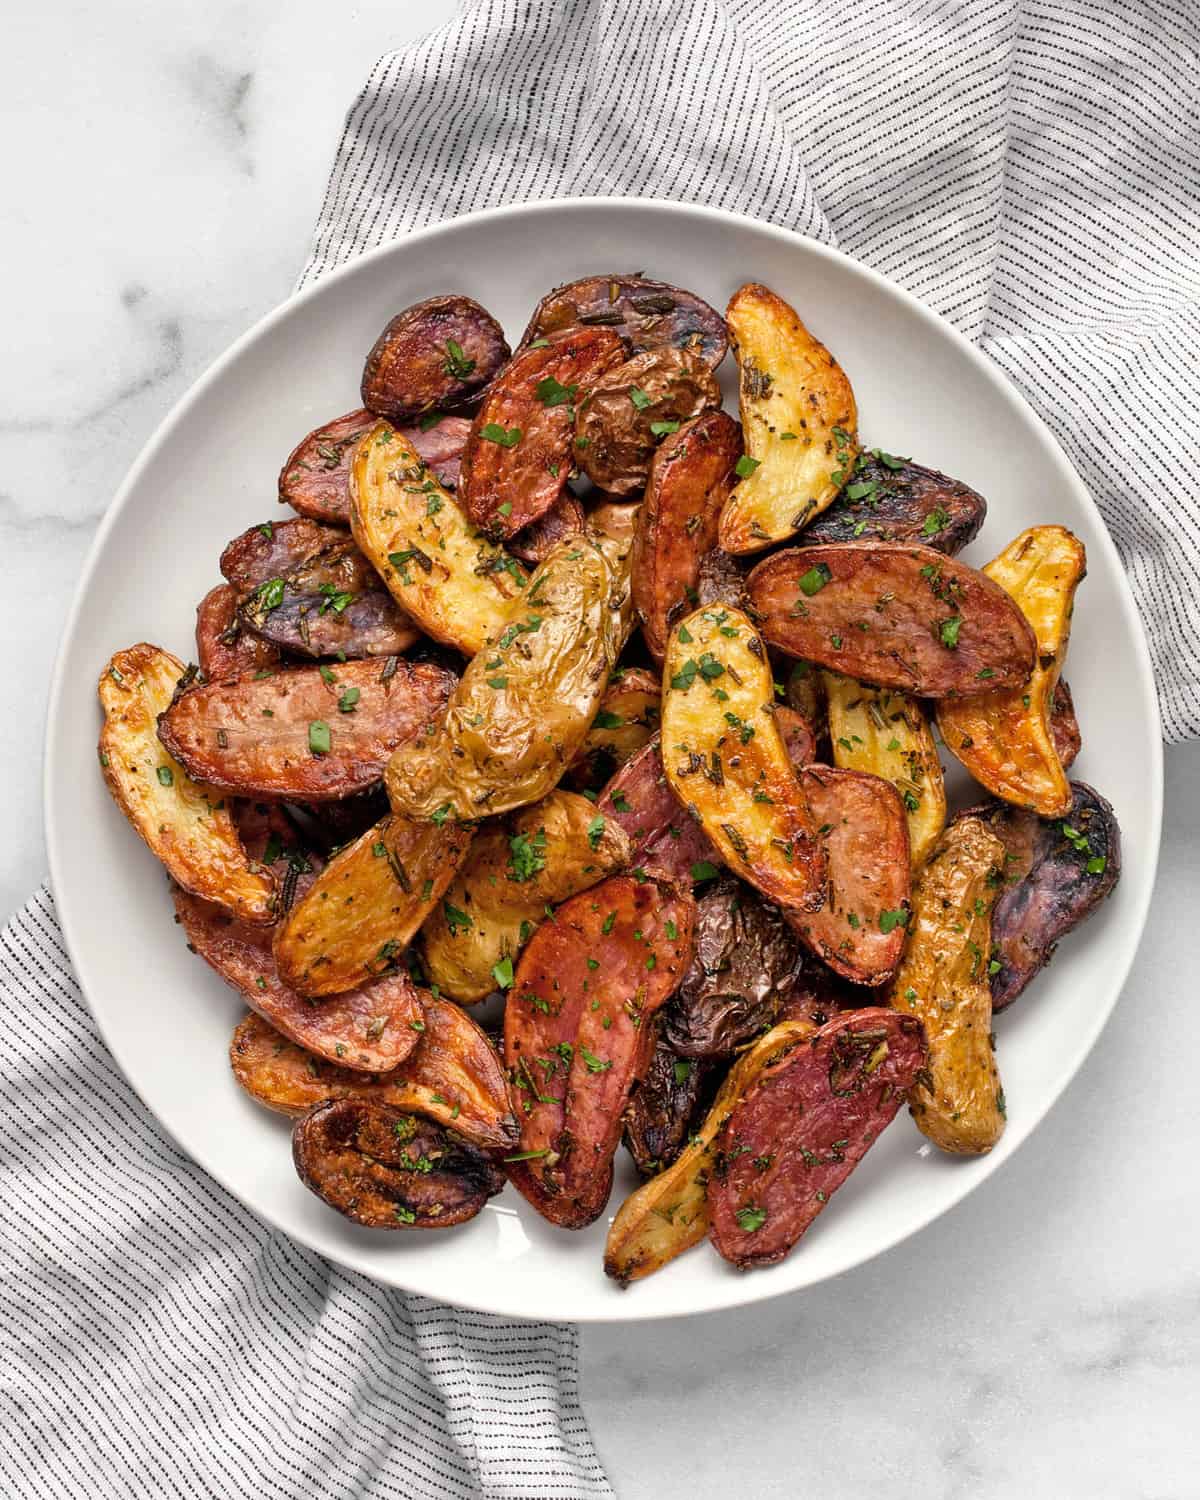 Roasted rosemary potatoes on a plate.